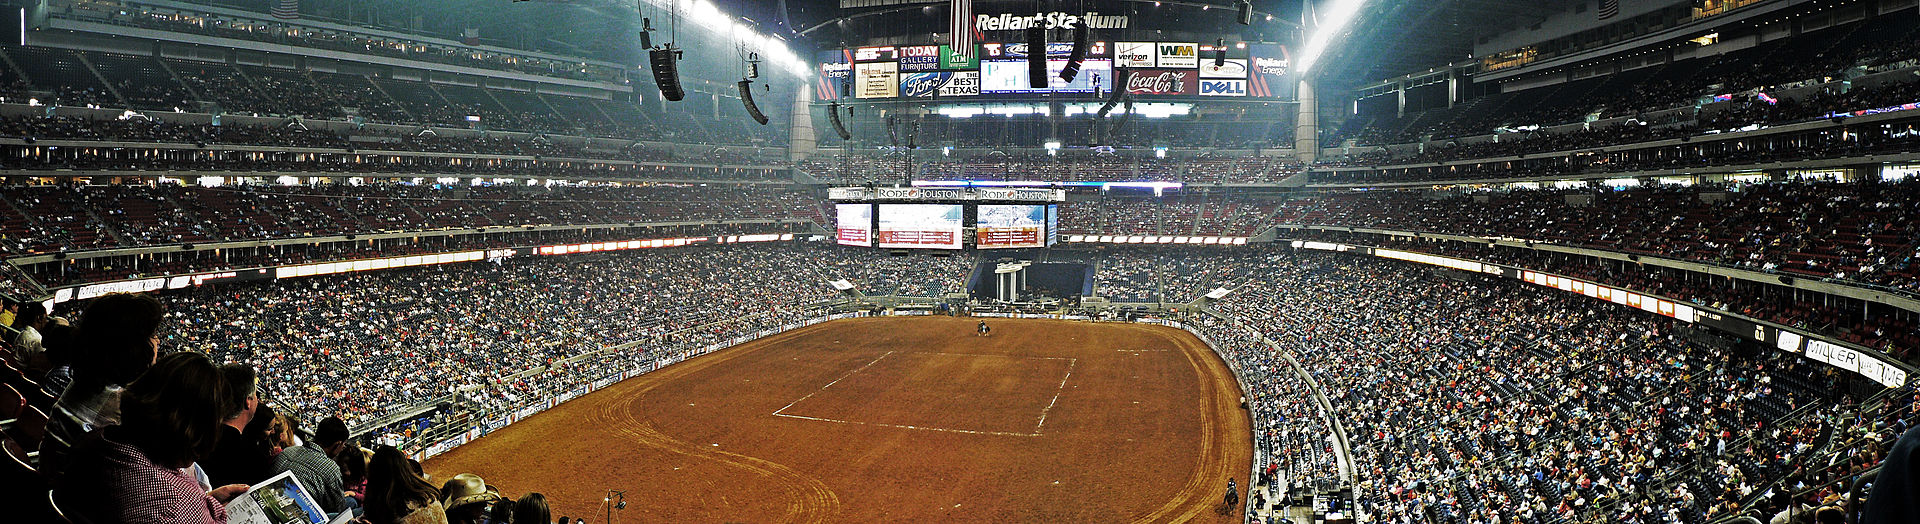 Inside of Reliant Stadium, home of the rodeo competition.